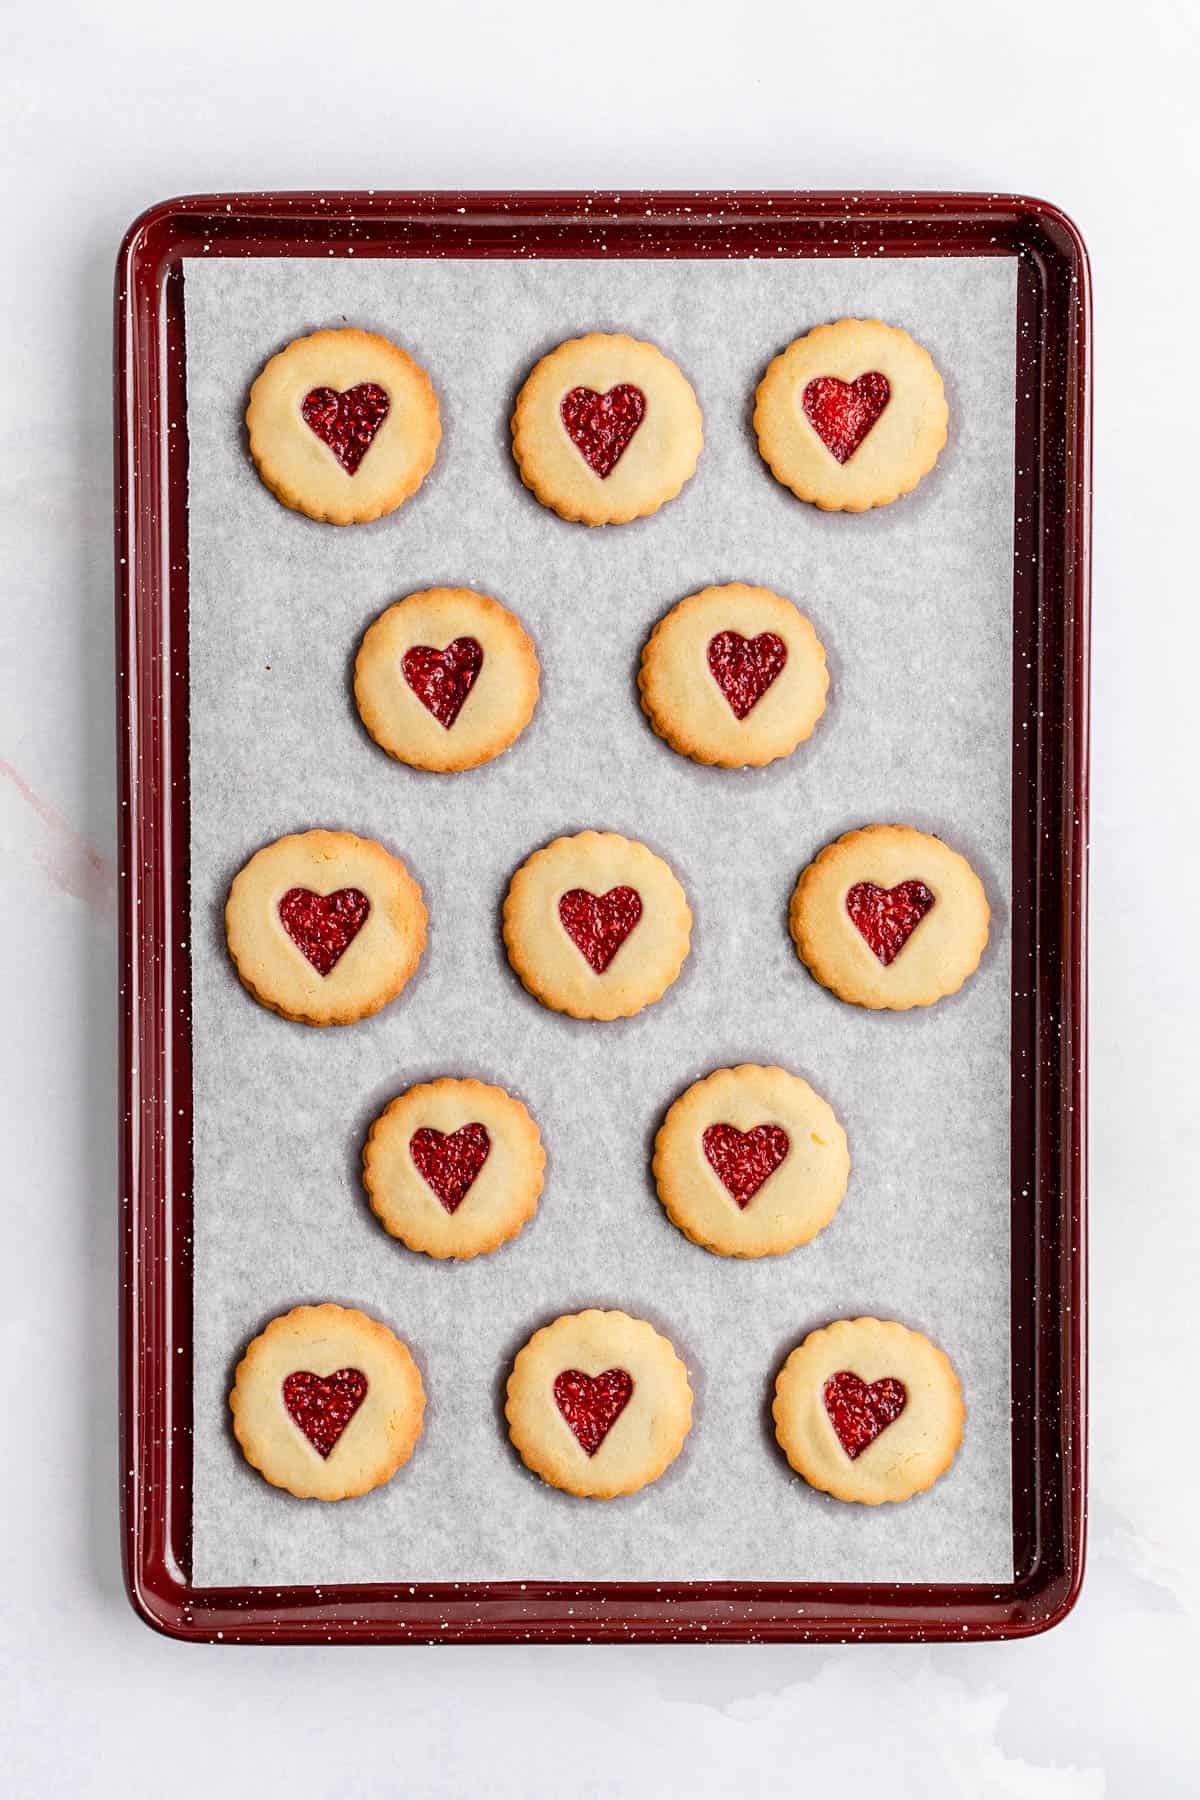 Baked Jammy dodger cookies on parchment on a burgundy pan.